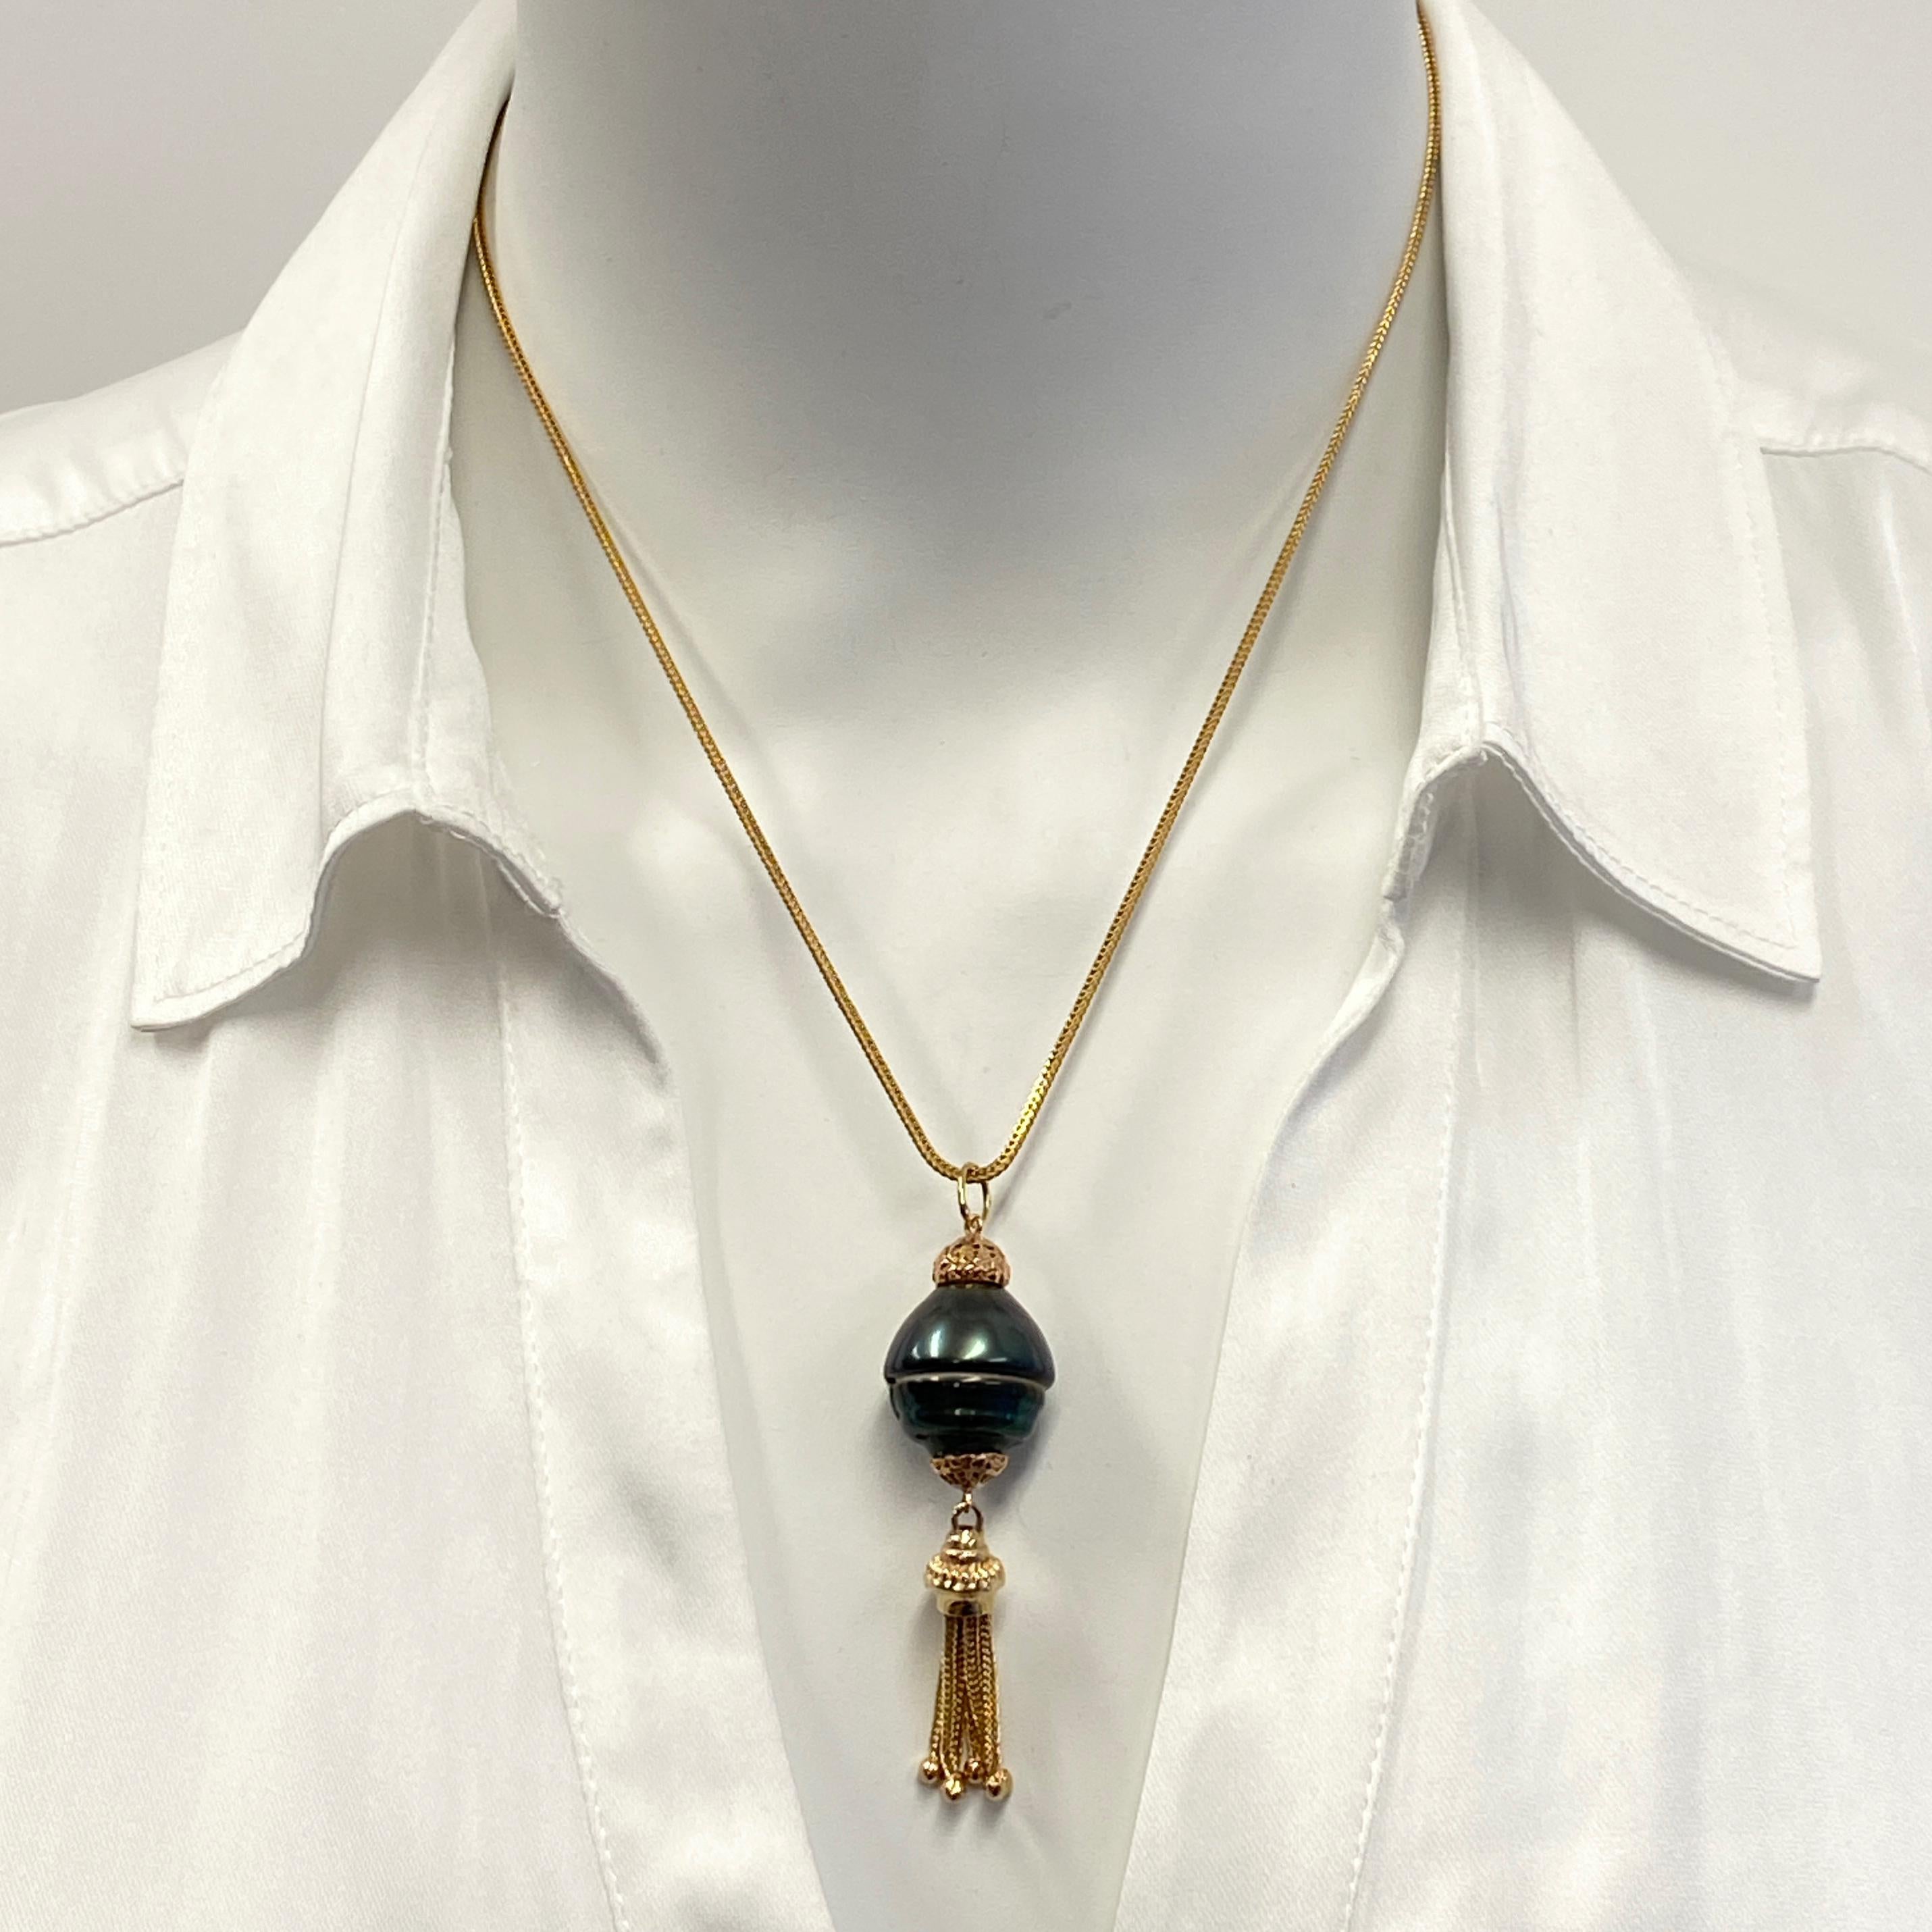 This funky, one-of-a-kind pendant features an unusual and very baroque green Tahitian pearl.  

Eytan Brandes played up the pearl's unique silhouette with vintage components -- rose gold caps and a yellow gold tassel -- and created a gorgeous little